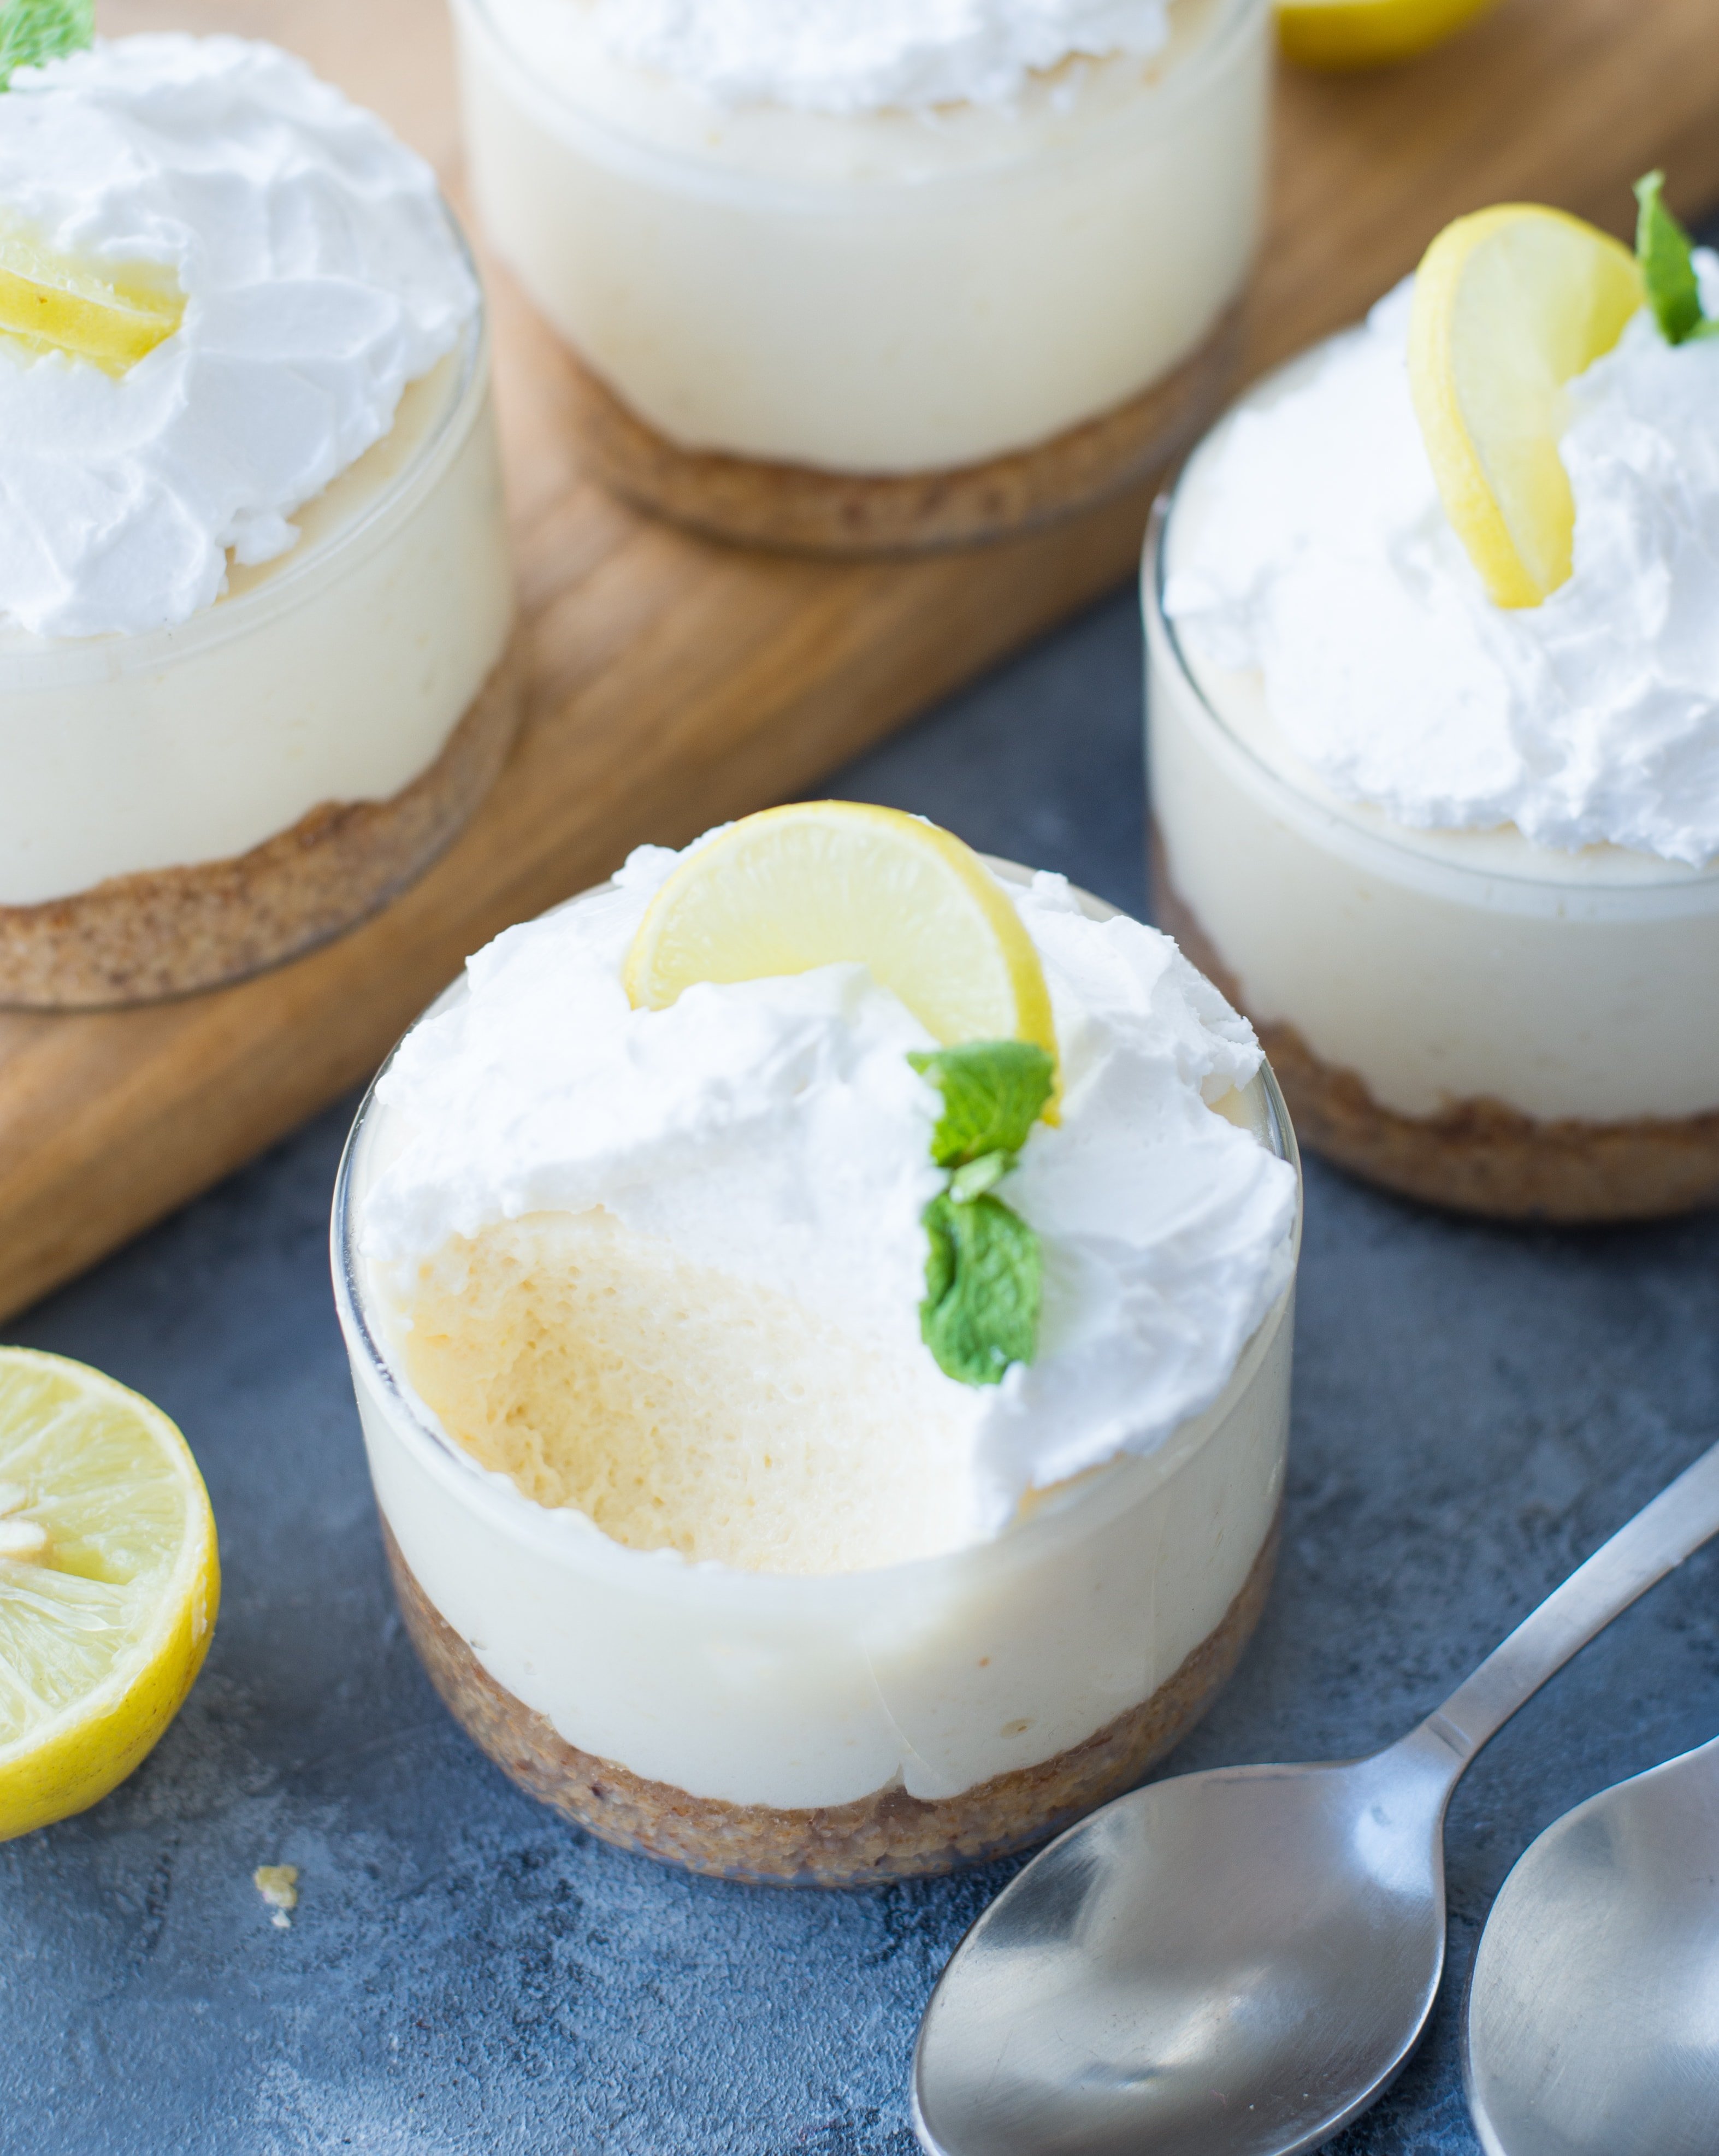 A smooth, creamy No-Bake Lemon Cheesecake Jars with is Low carb without any compromise with the taste.  A perfect low carb dessert for the summer with light, airy filling and real lemon flavor. 